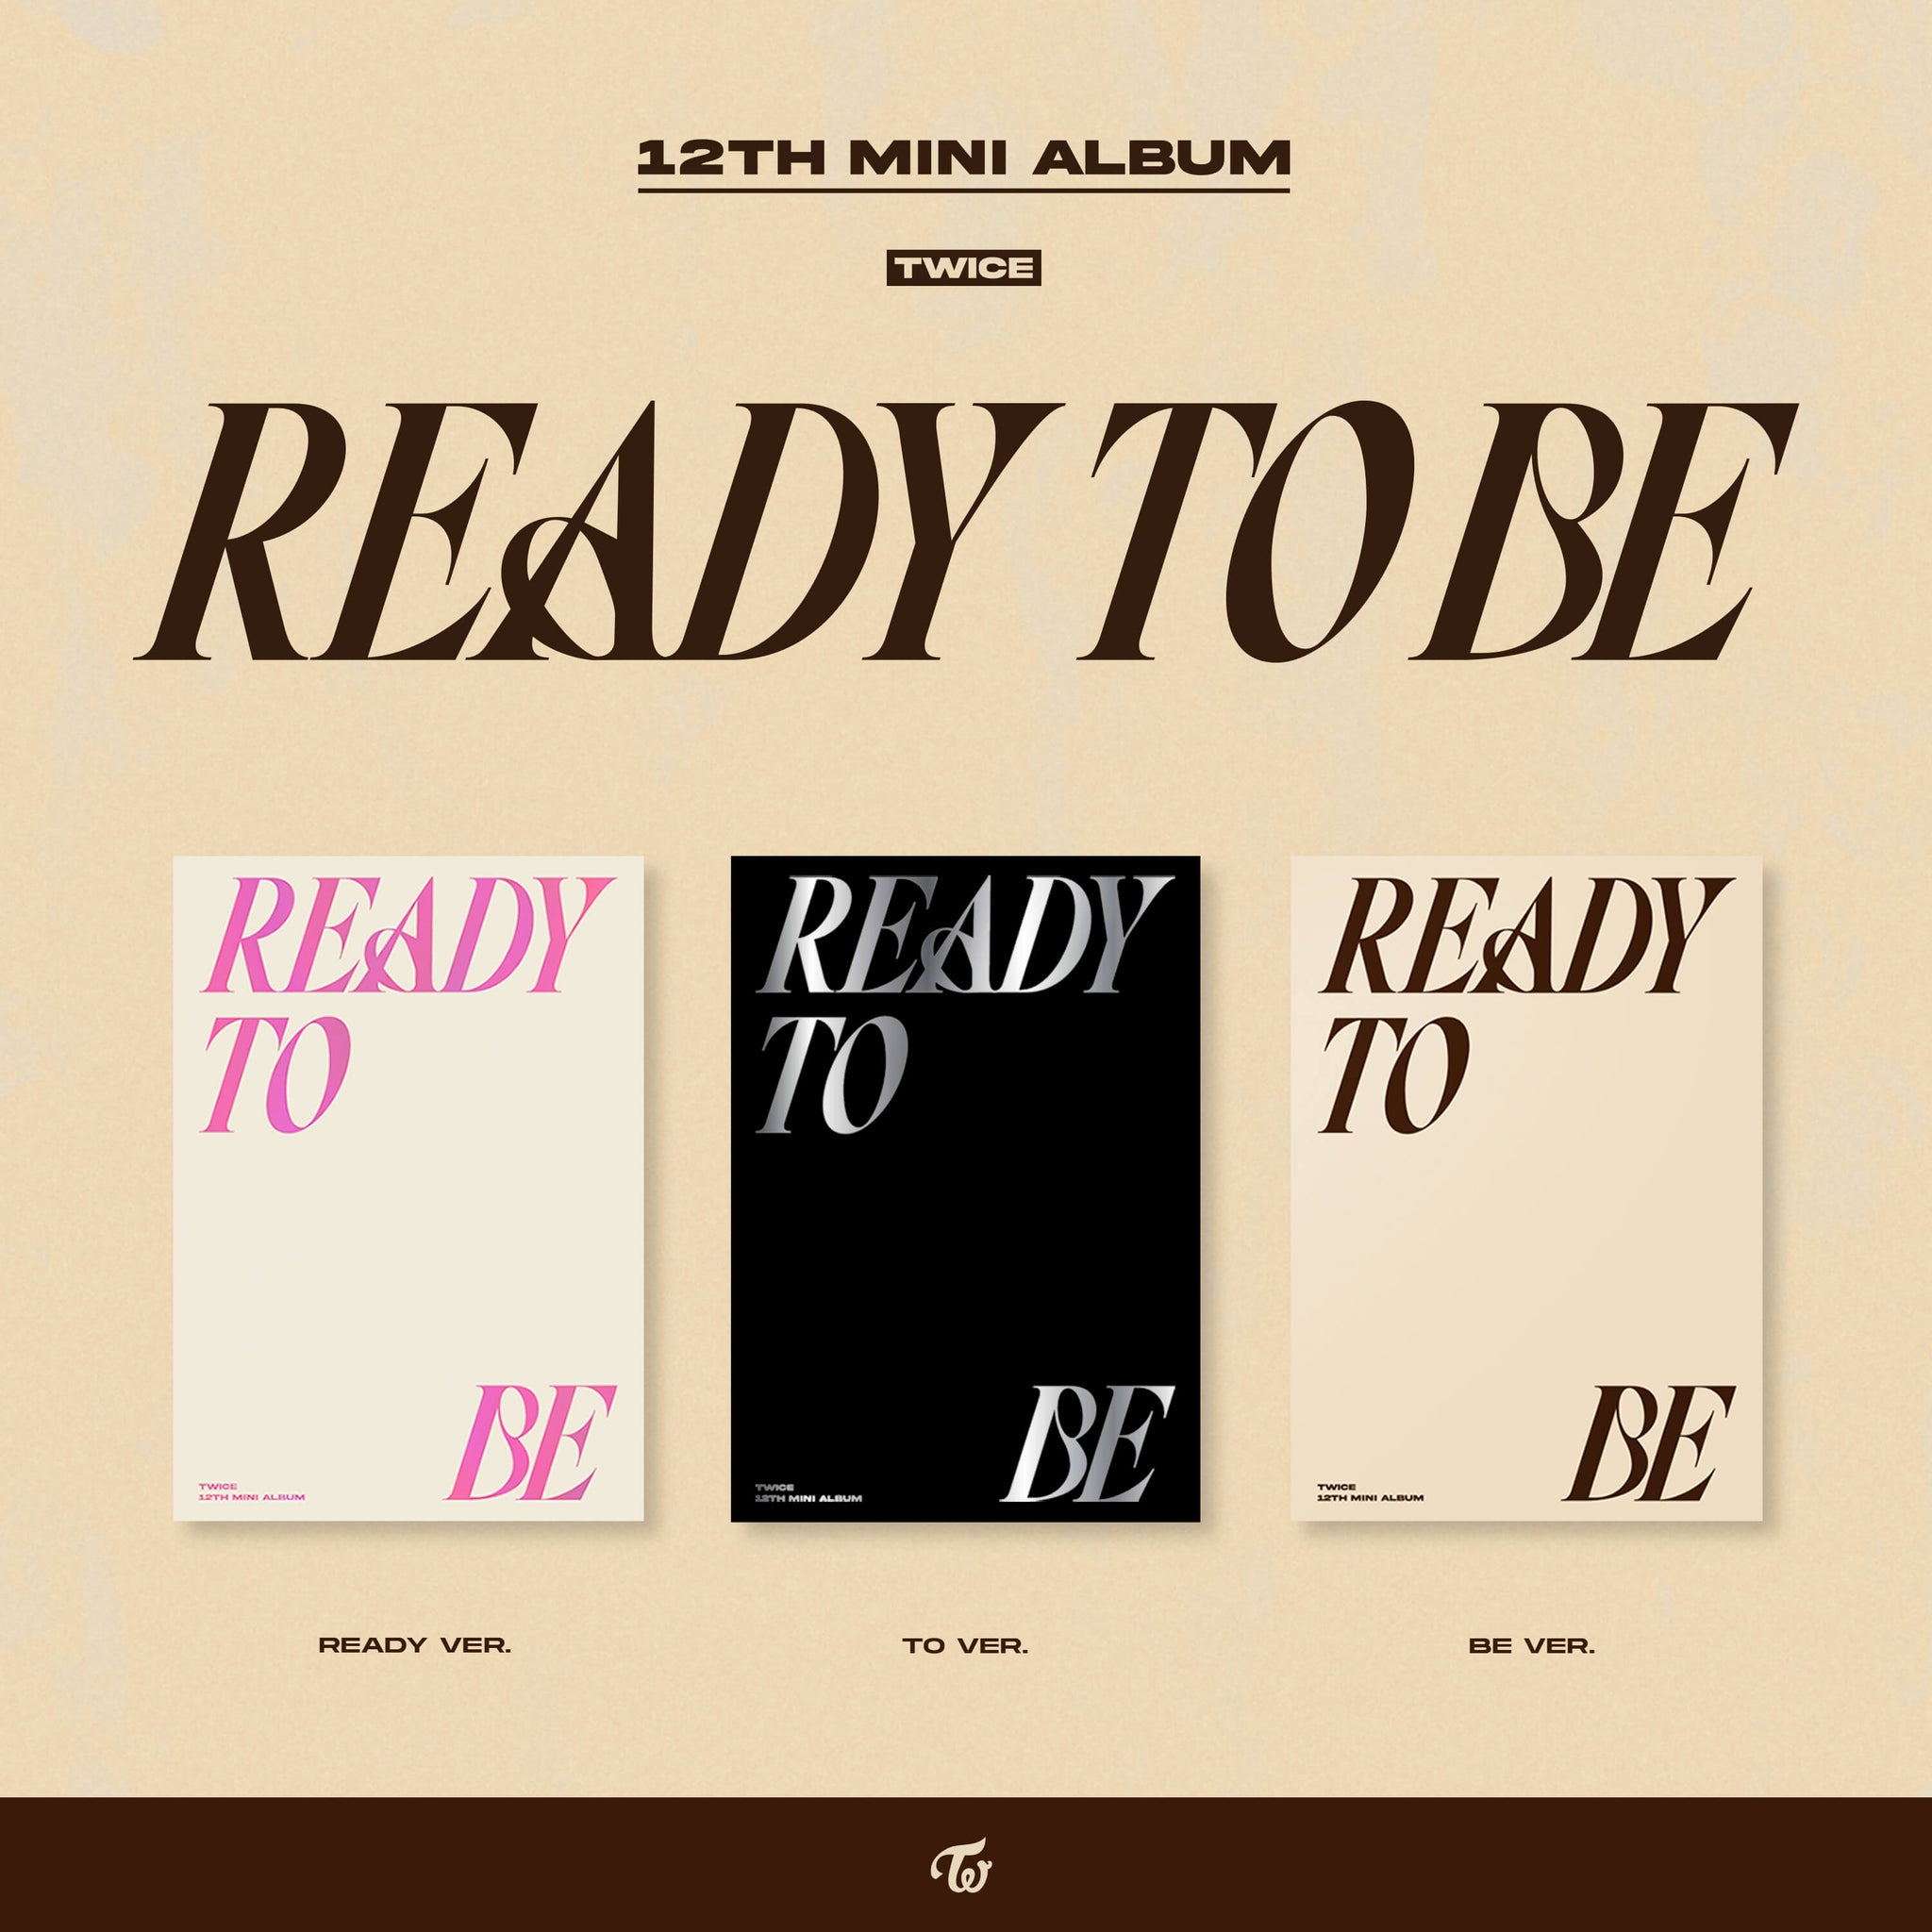 TWICE 12th Mini Album READY TO BE - READY + TO + BE Version + Soundwave Lucky Draw